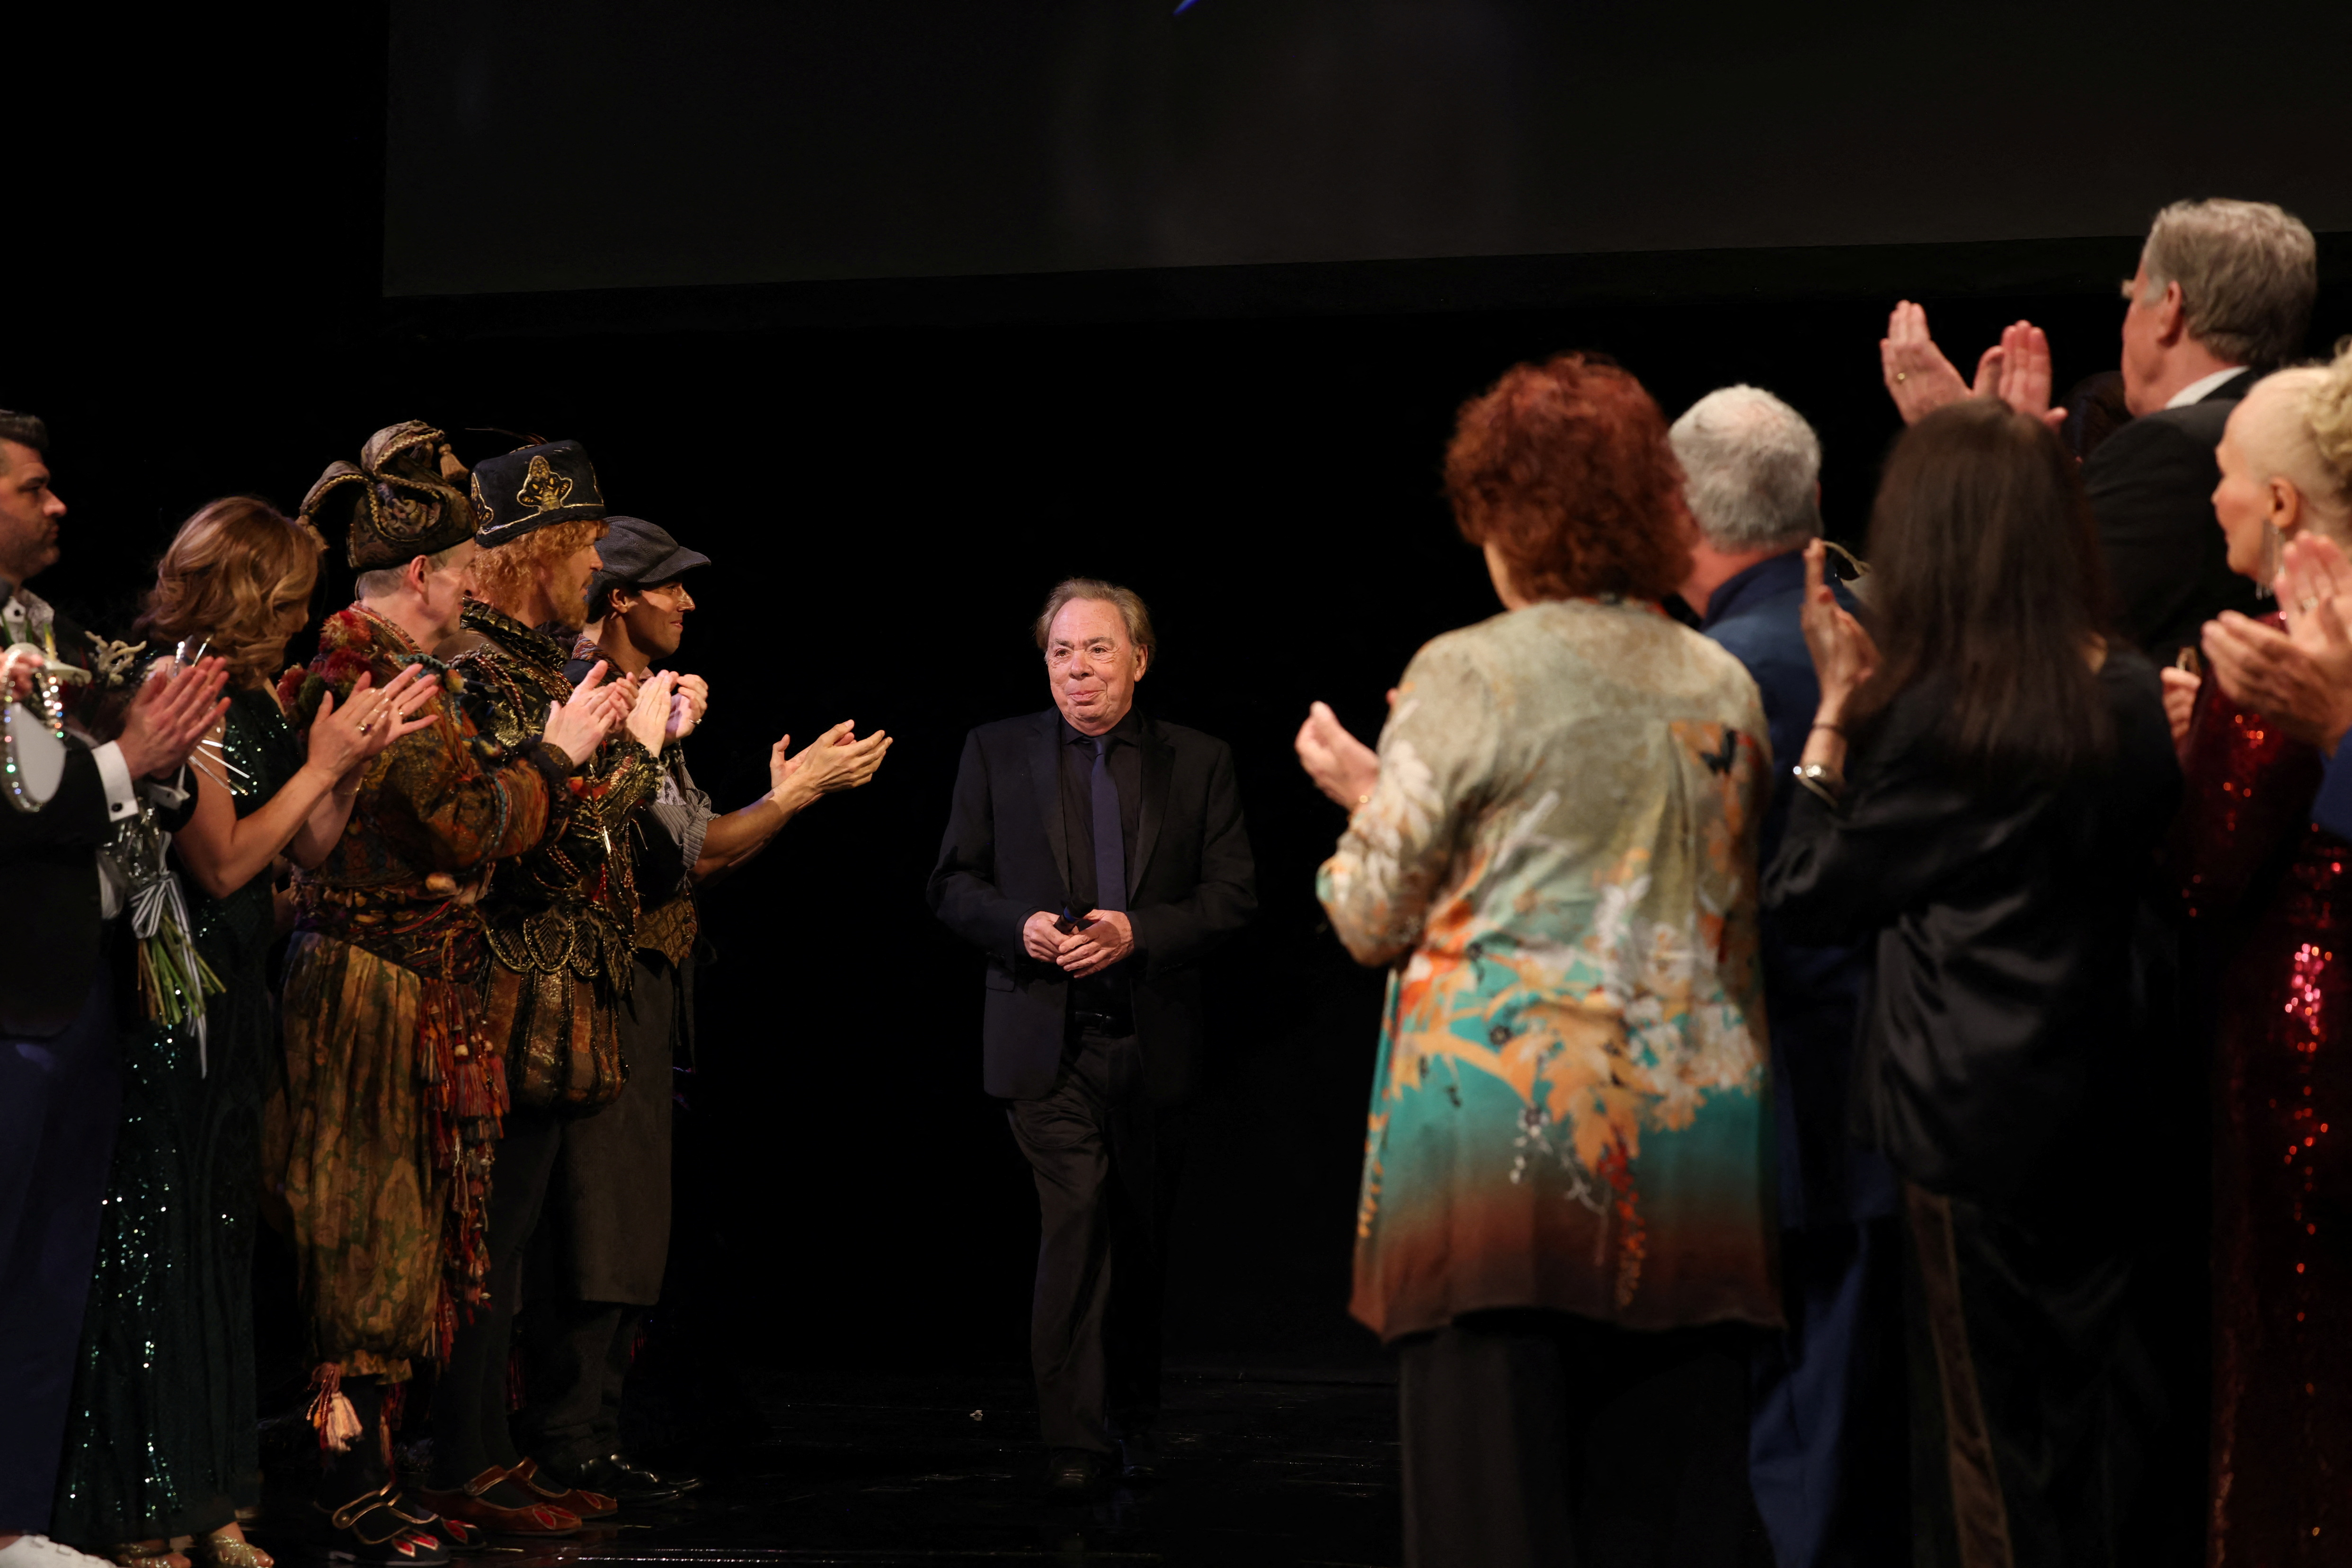 The play's music producer, Andrew Lloyd Webber, waved goodbye from the stage after the performance.  (PHOTO: REUTERS/Caitlin Ochs)